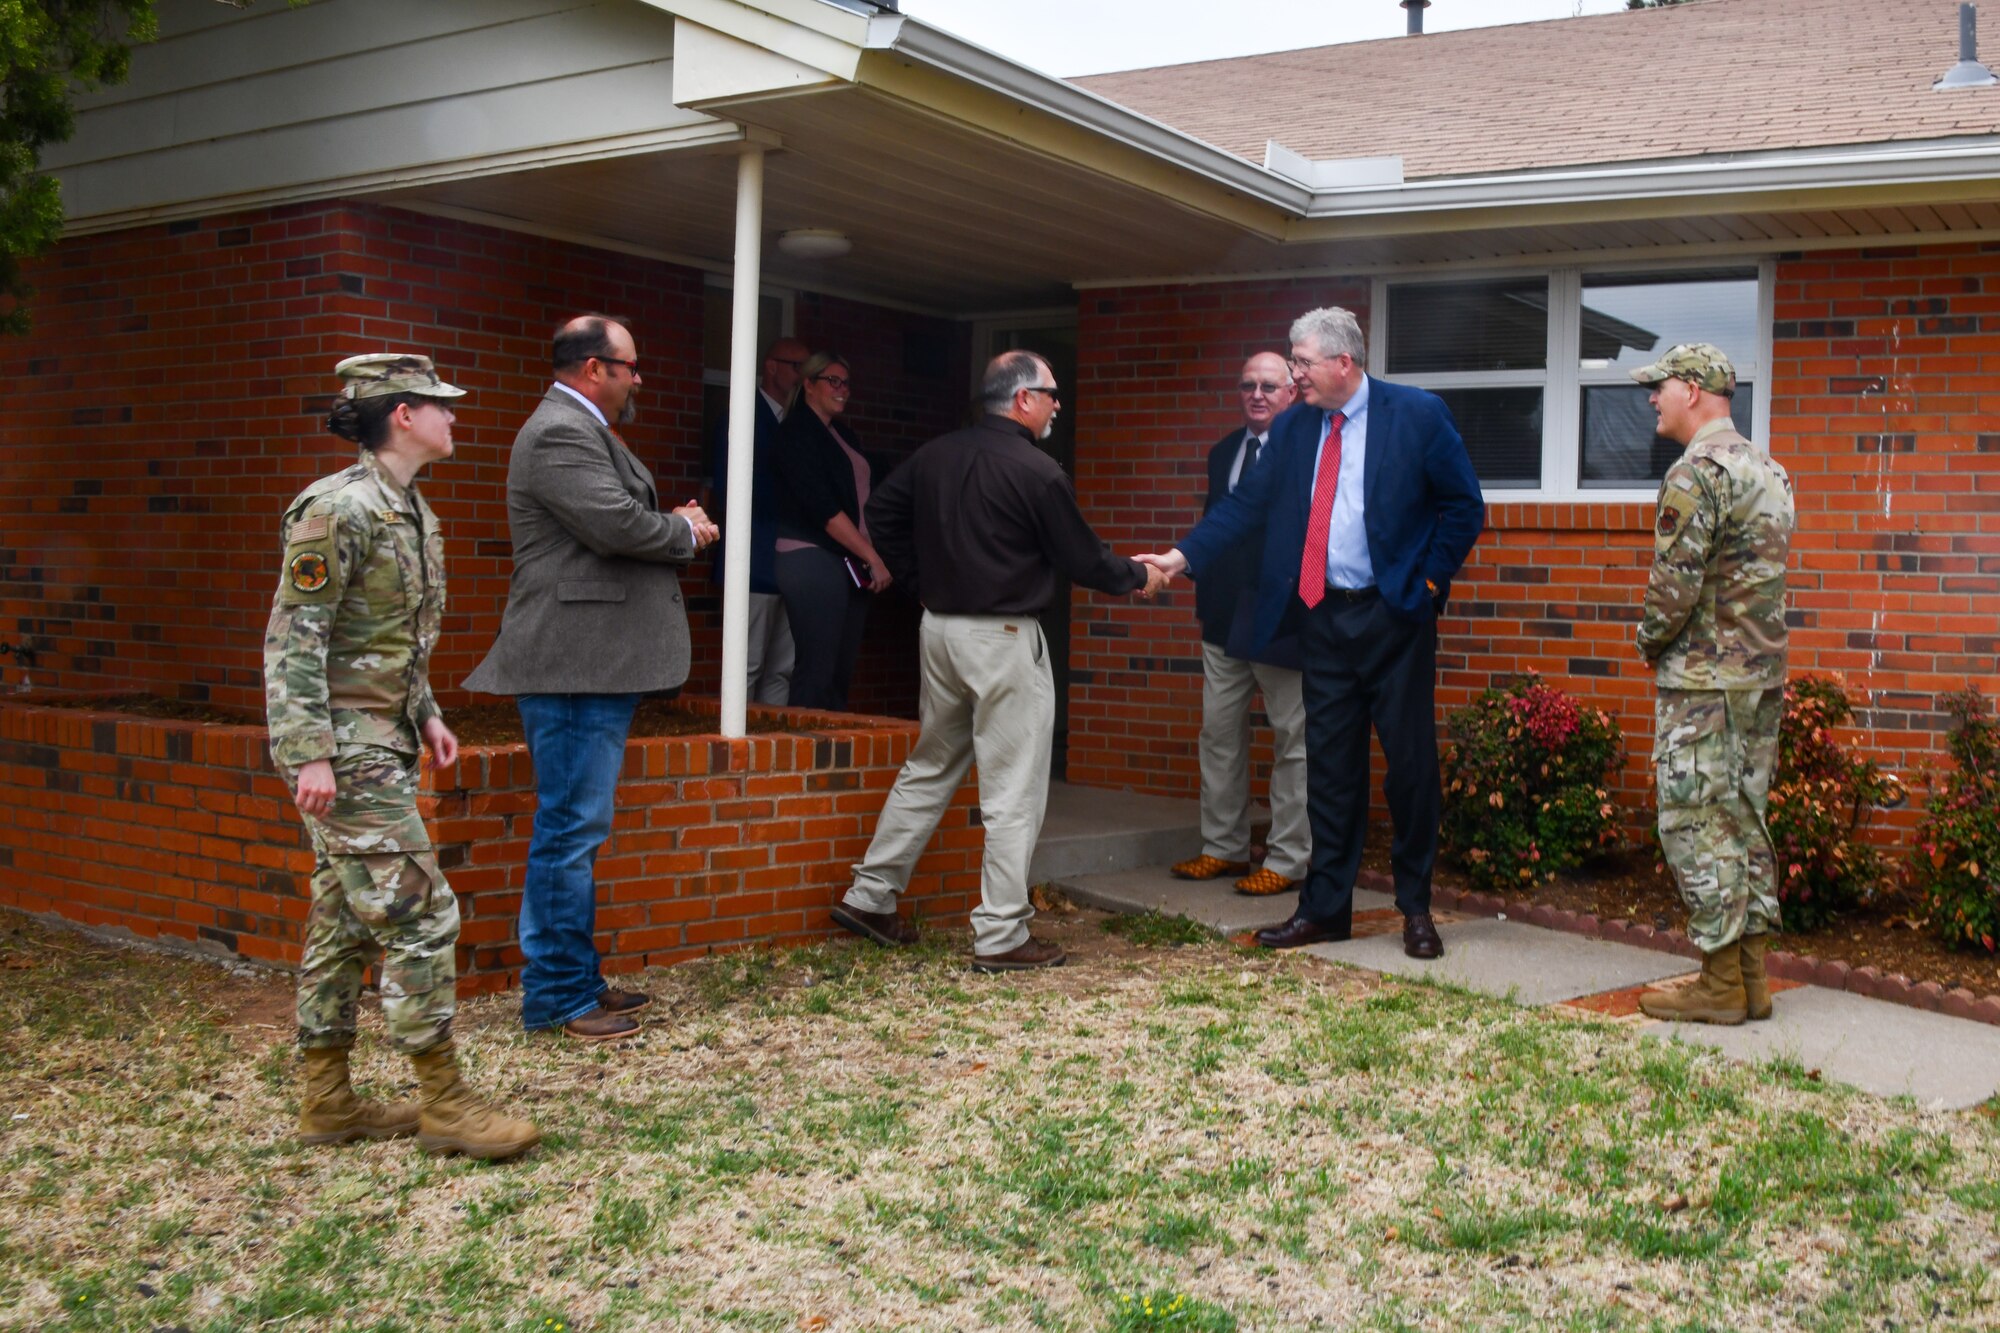 Rep. Frank Lucas, Oklahoma congressman, greets Capehart housing community representatives at Altus Air Force Base, Oklahoma, April 22, 2022. The team visited homes on base to discuss plans for future construction and renovation projects during a tour with the 97th Air Mobility Wing. (U.S. Air Force photo by Airman 1st Class Miyah Gray)